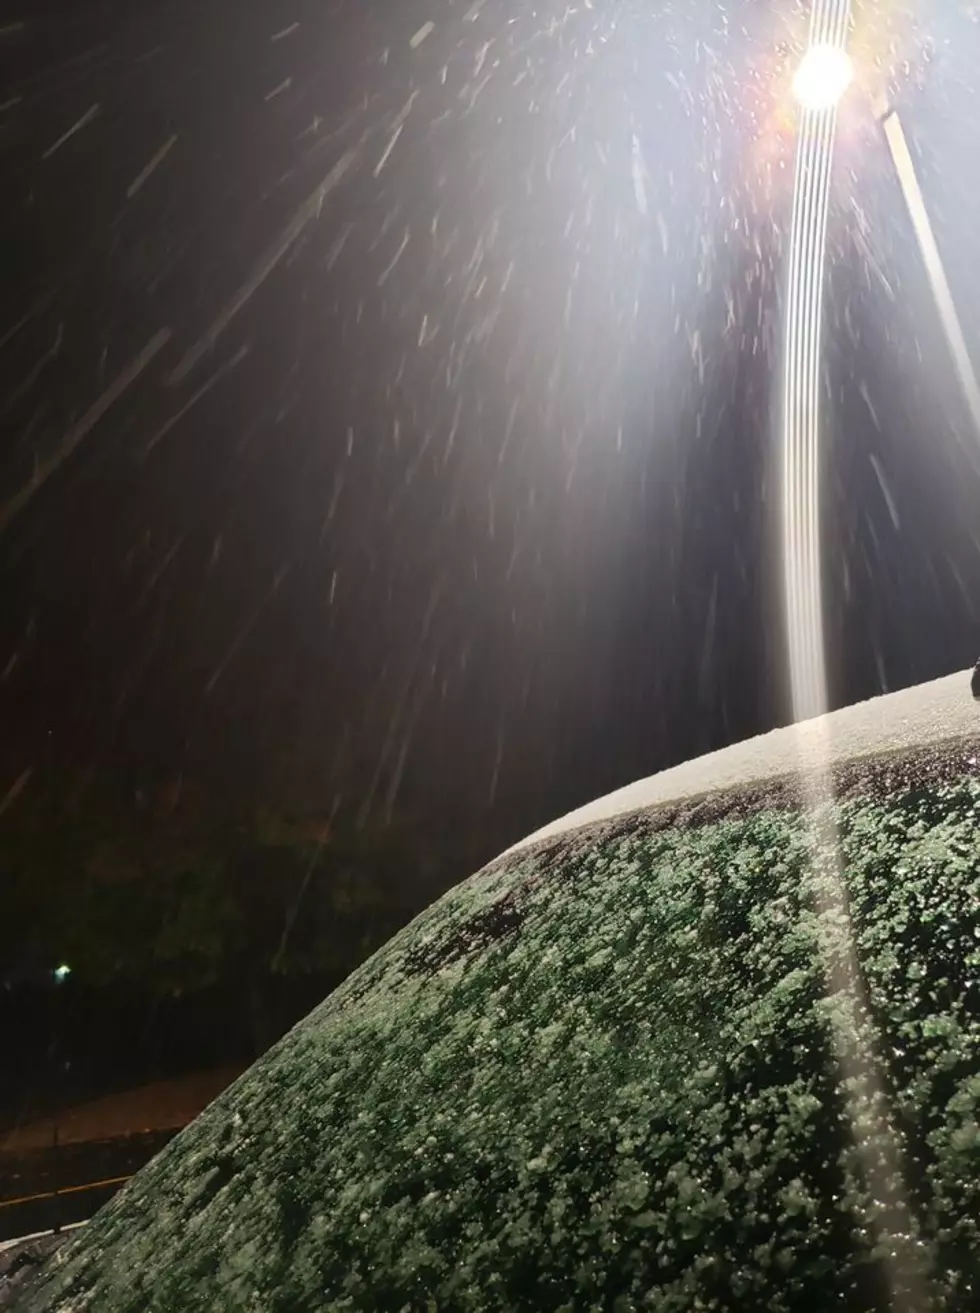 October Brings Frost And Snow To Michigan